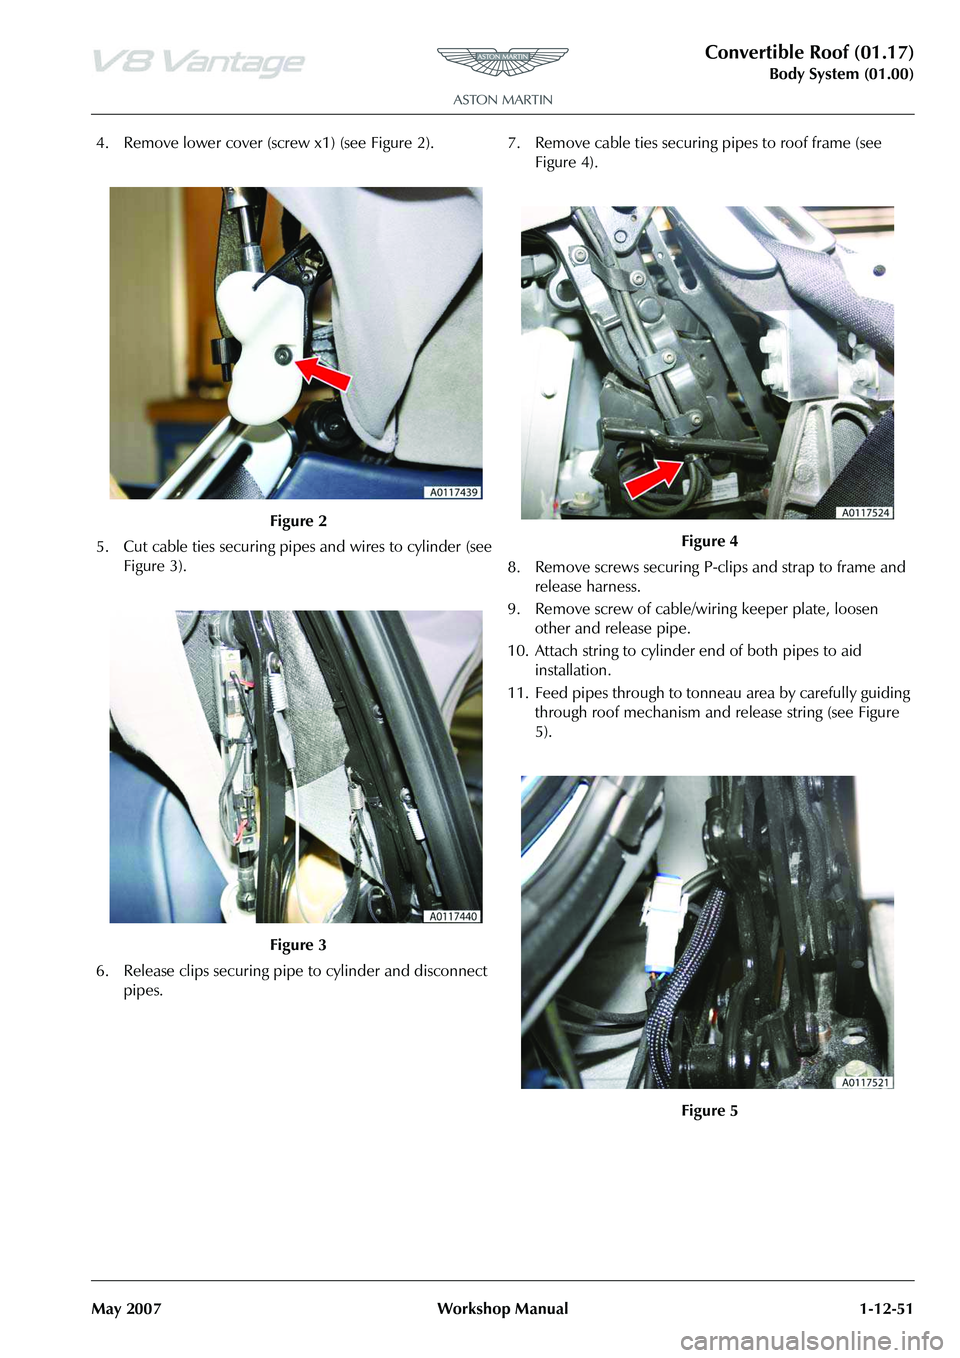 ASTON MARTIN V8 VANTAGE 2010  Workshop Manual Convertible Roof (01.17)
Body System (01.00)
May 2007 Workshop Manual 1-12-51
4. Remove lower cover (screw  x1) (see Figure 2).   
5. Cut cable ties securing pipes and wires to cylinder (see  Figure 3